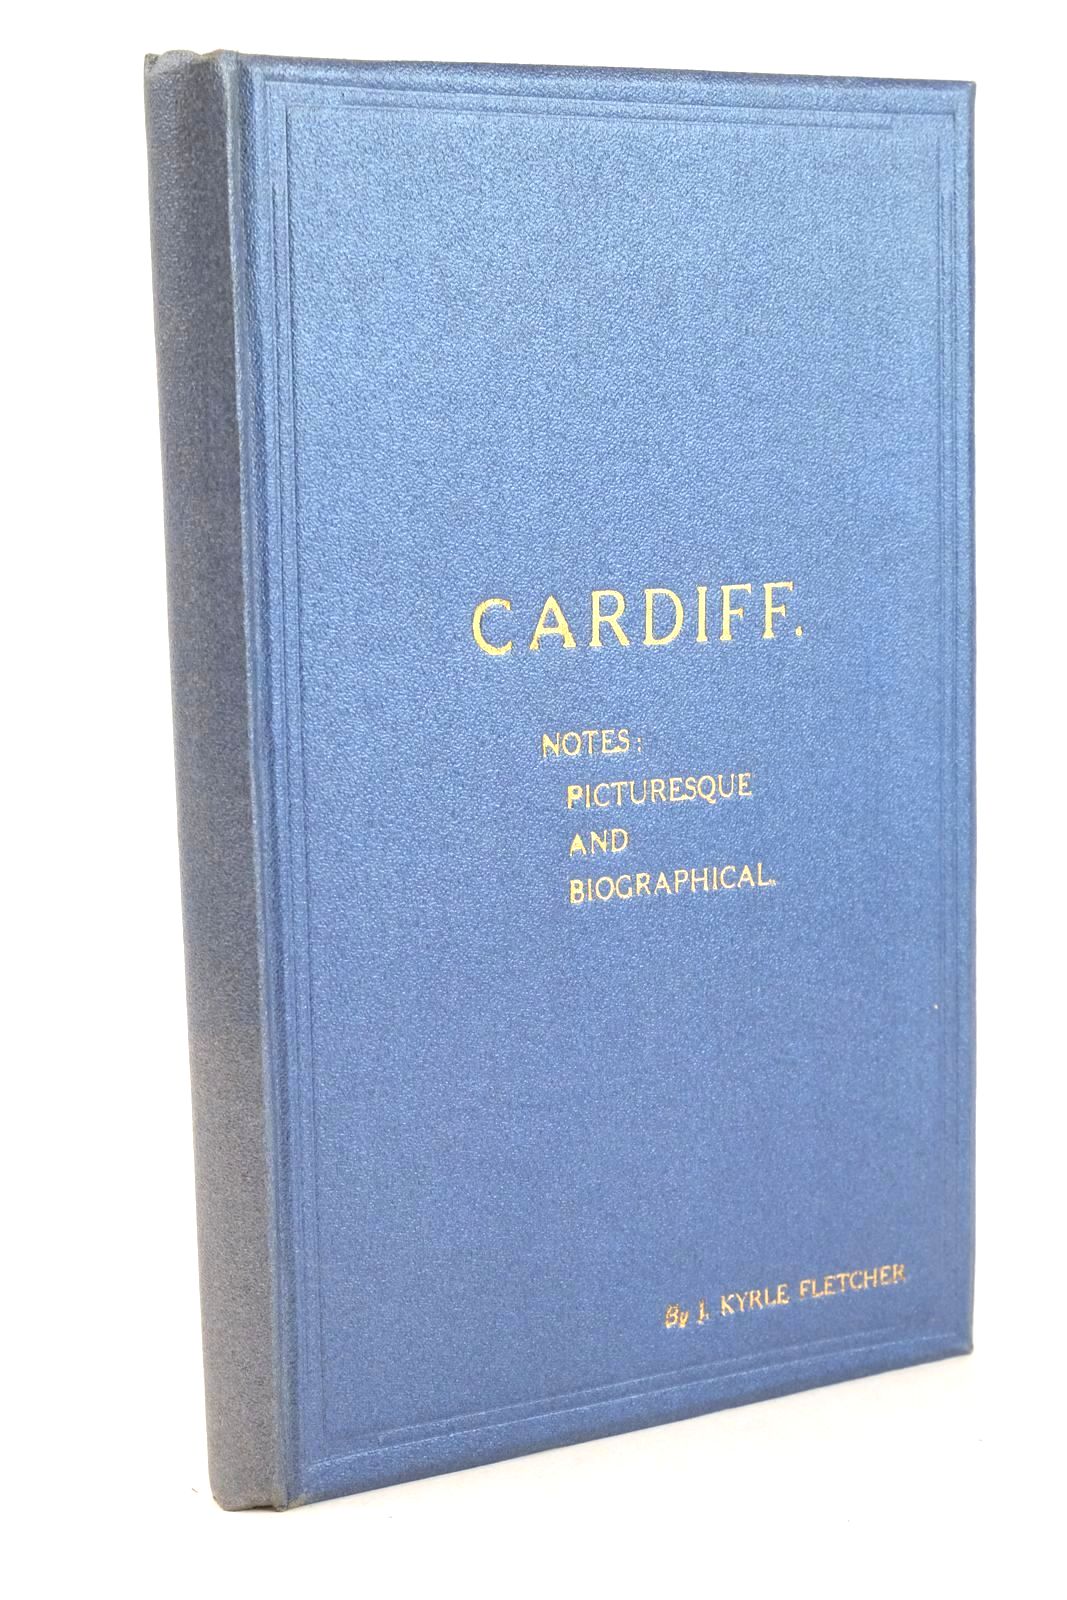 Photo of CARDIFF NOTES PICTURESQUE AND BIOGRAPHICAL written by Fletcher, J. Kyrle illustrated by Griffiths, B.T.A. published by J. Kyrle Fletcher (STOCK CODE: 1325731)  for sale by Stella & Rose's Books